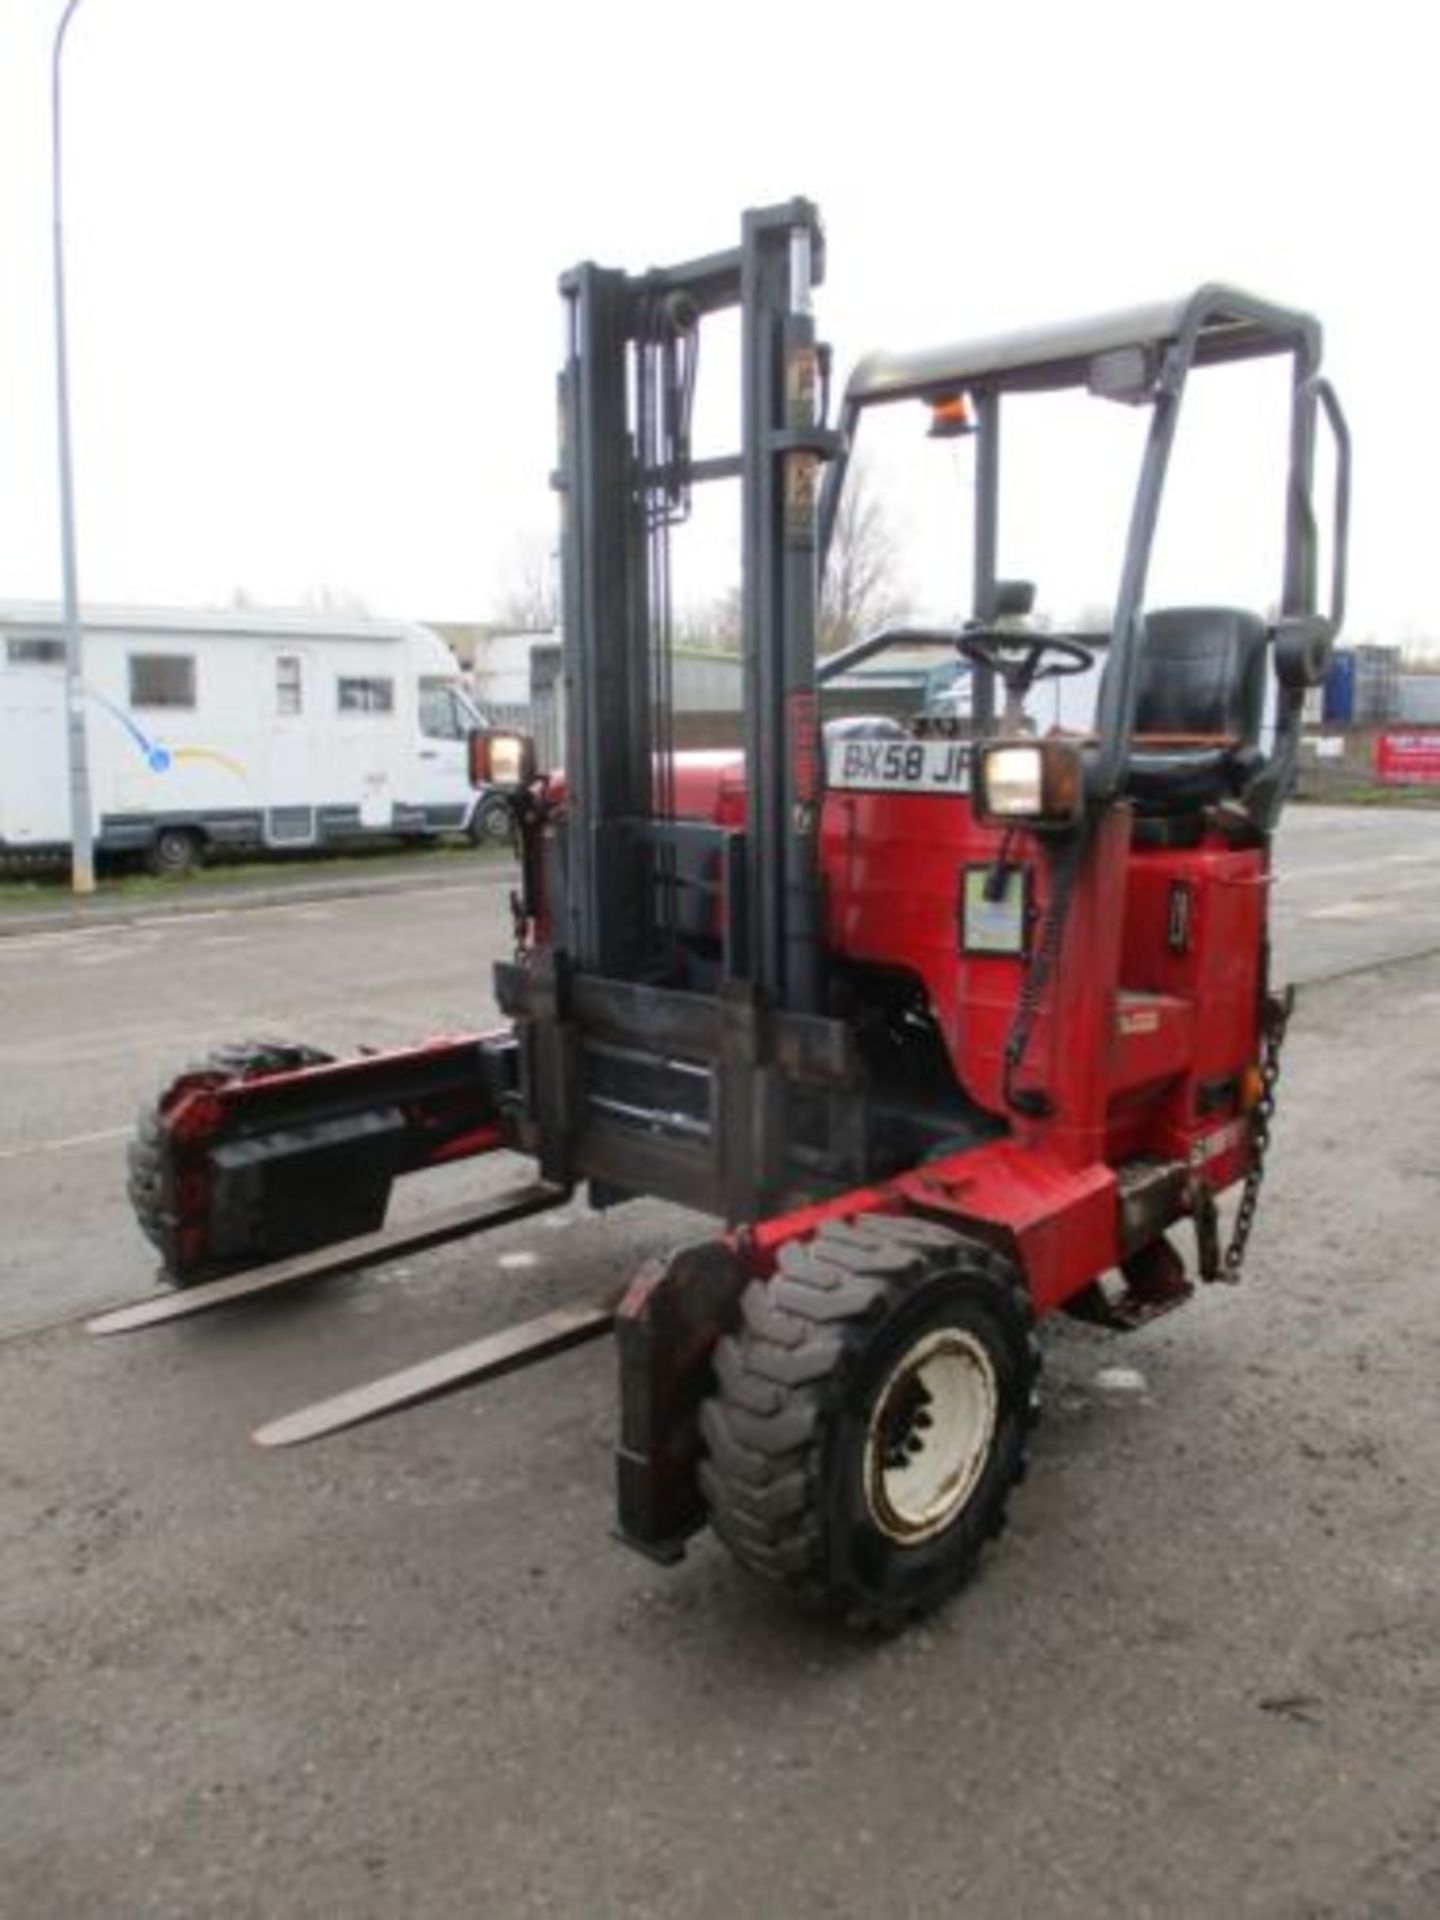 2009 MOFFETT MOUNTY M5 20.3 FORK LIFT FORKLIFT TRUCK MOUNTED LOLER DELIVERY - Image 7 of 8